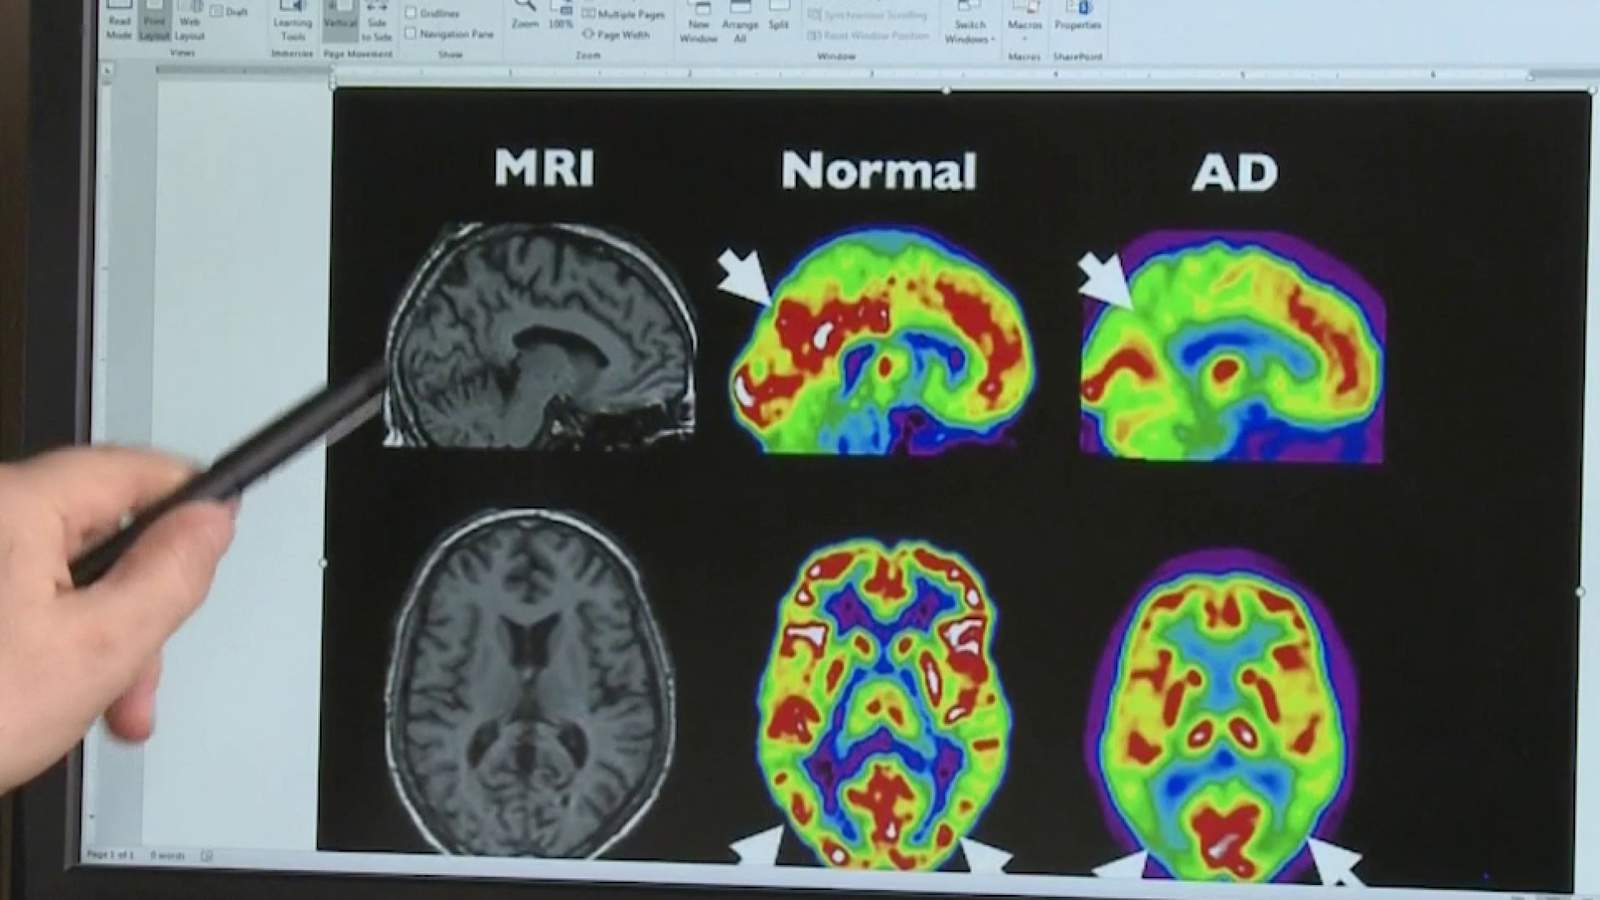 Women more likely to suffer from Alzheimer’s disease, experts say